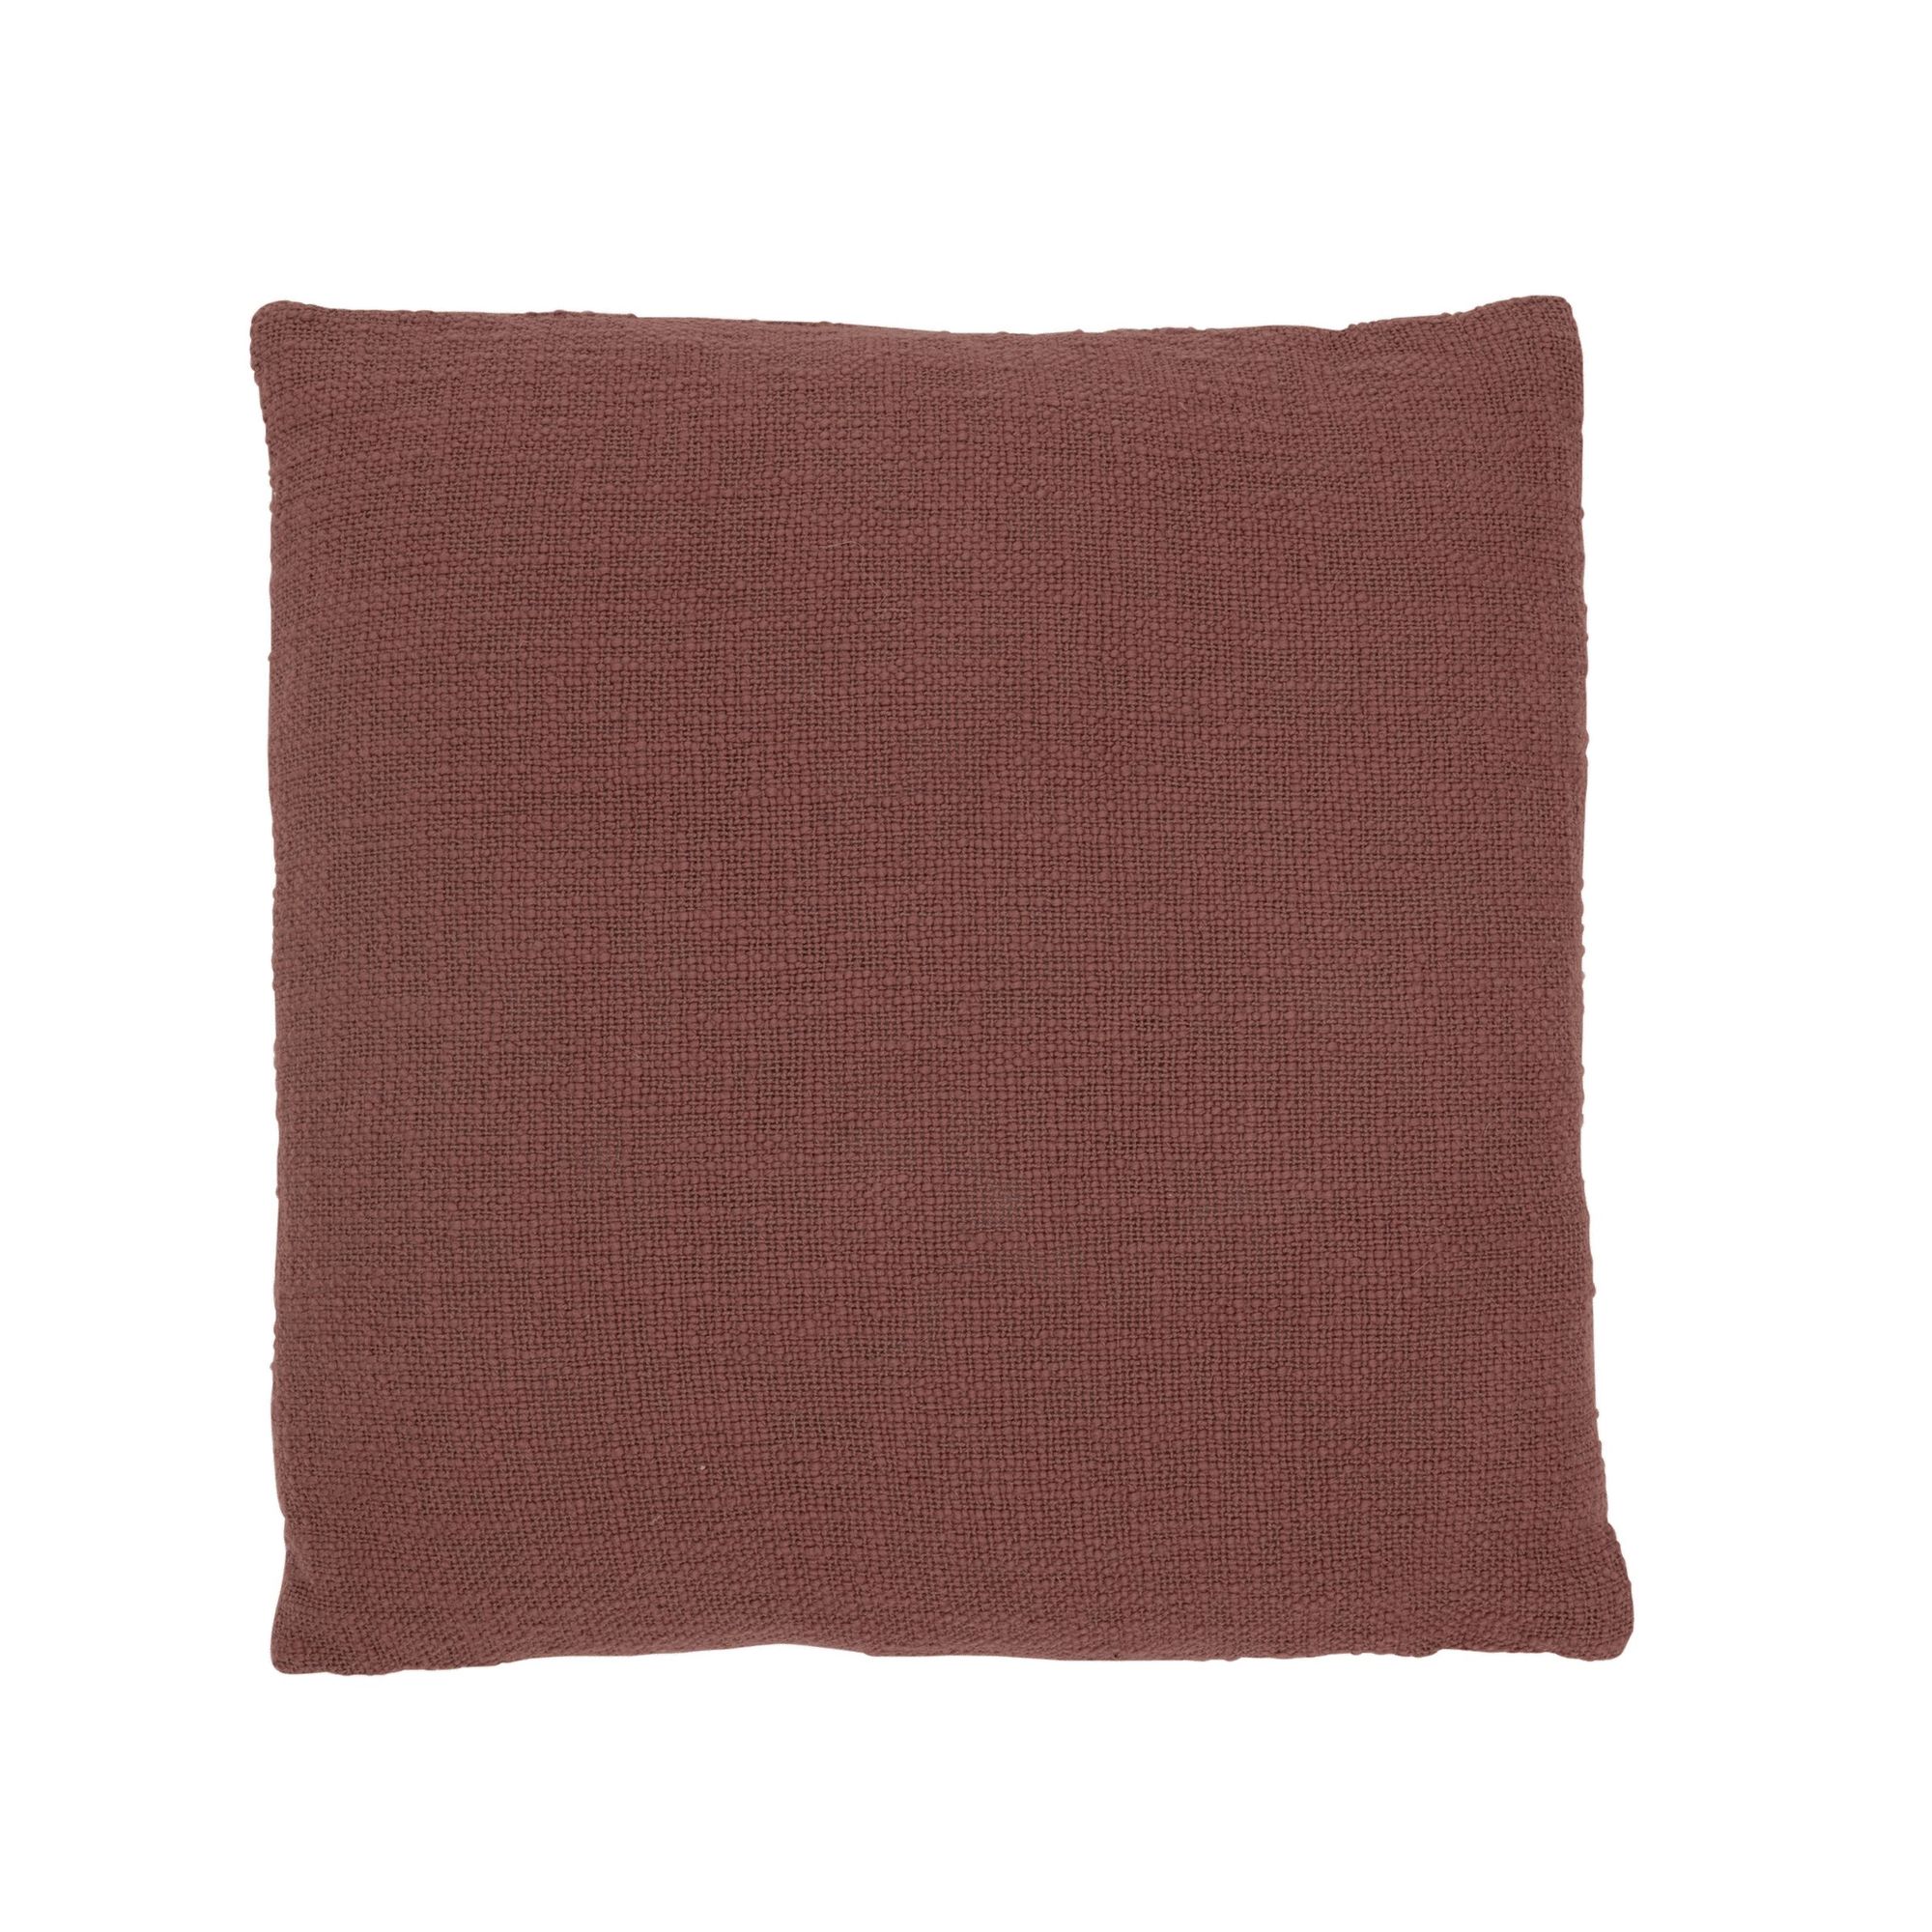 Unc Cushion Soft Touch Cameo Brown Gift